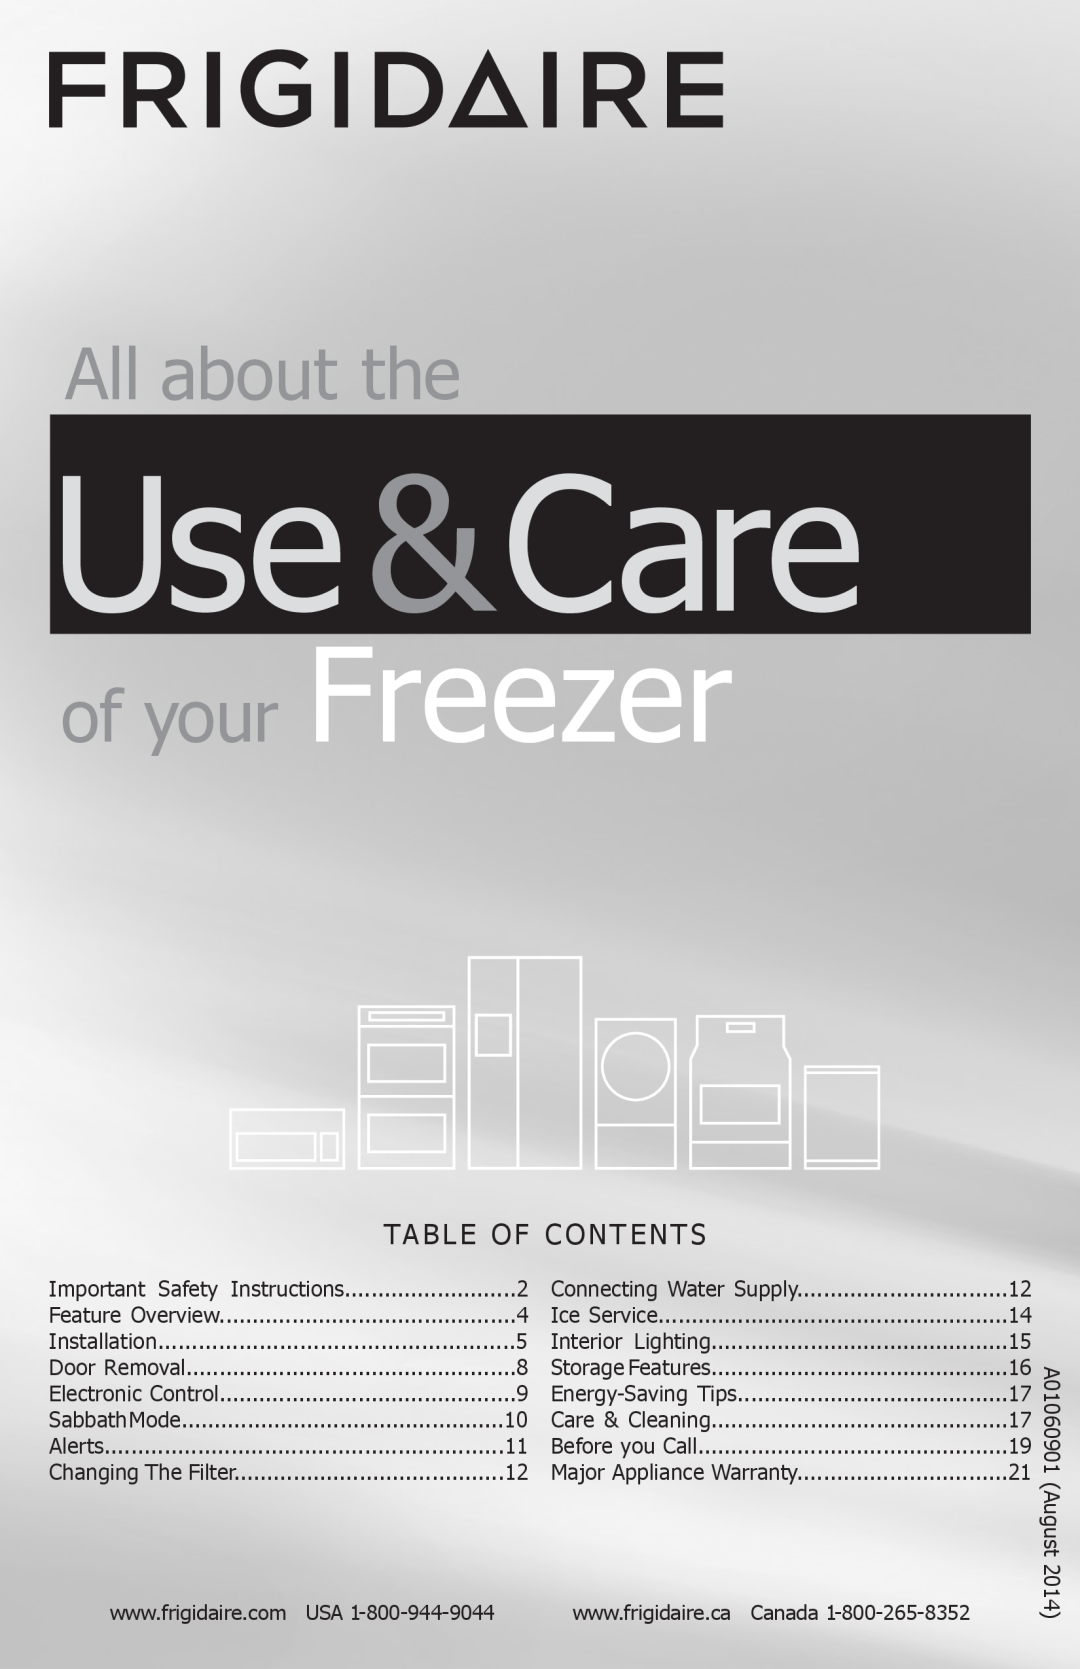 Frigidaire A01060901 manual Use &Care, All about the, of your Freezer, Ta B L E O F C O N T E N T S, Installation 